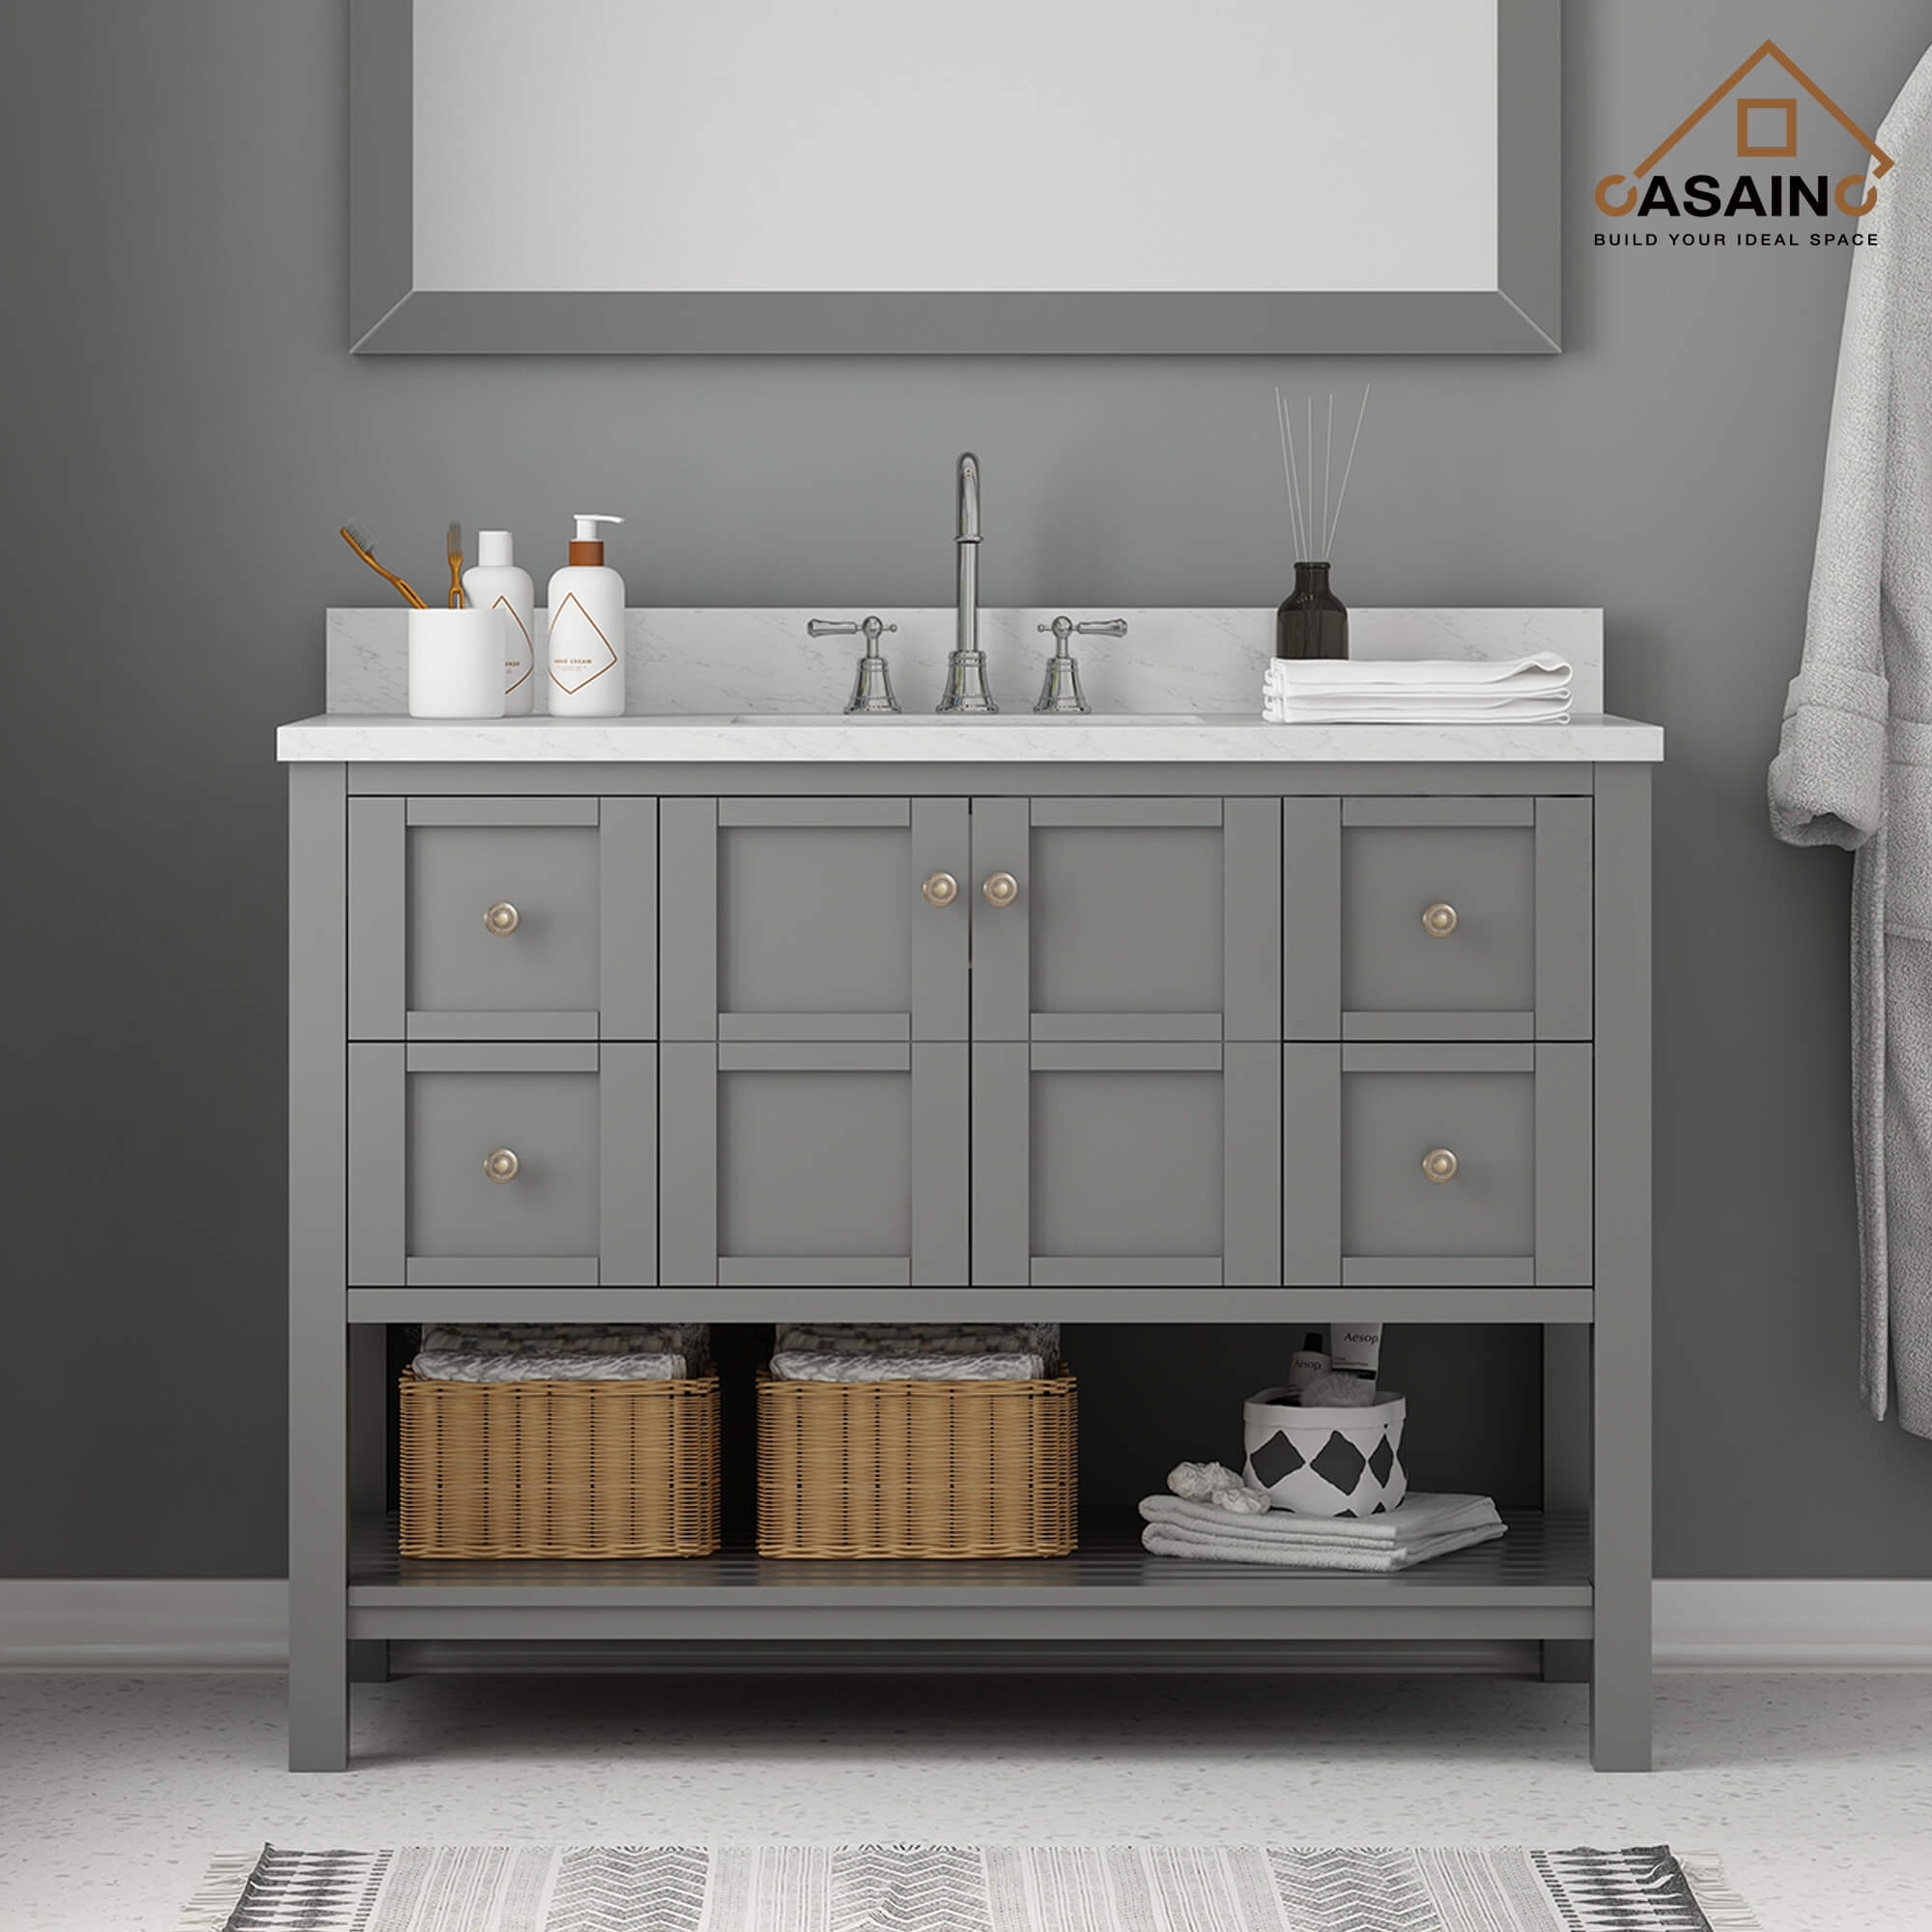 CASAINC 48 x 22 x 35.4 in. Solid Wood Bath Vanity with Carrara White Marble Top and Shelf in Gray/White (No/With Mirror)